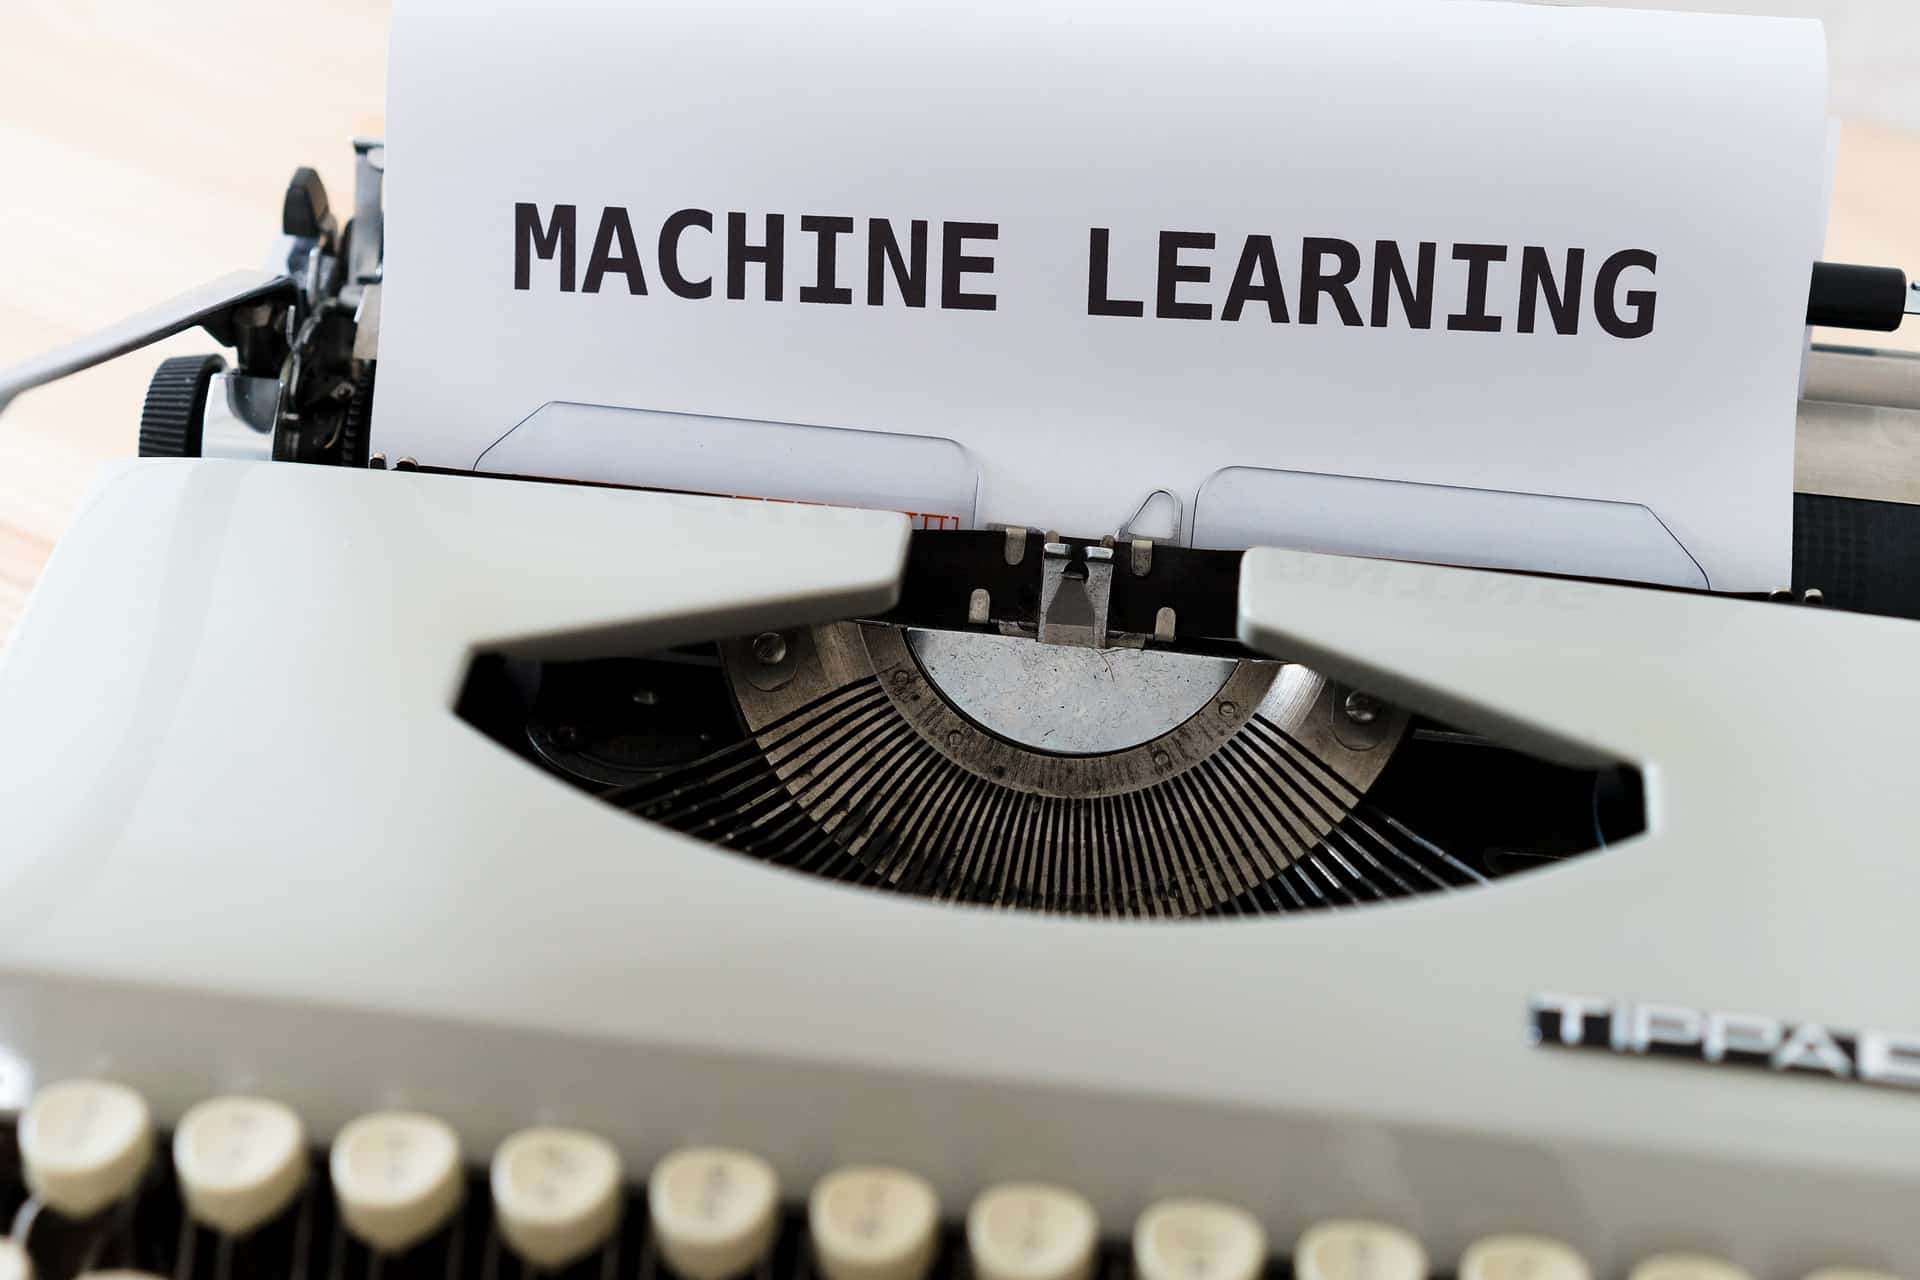 What No One Will Tell You About Learning Machine Learning (Your Full Guide to Start)